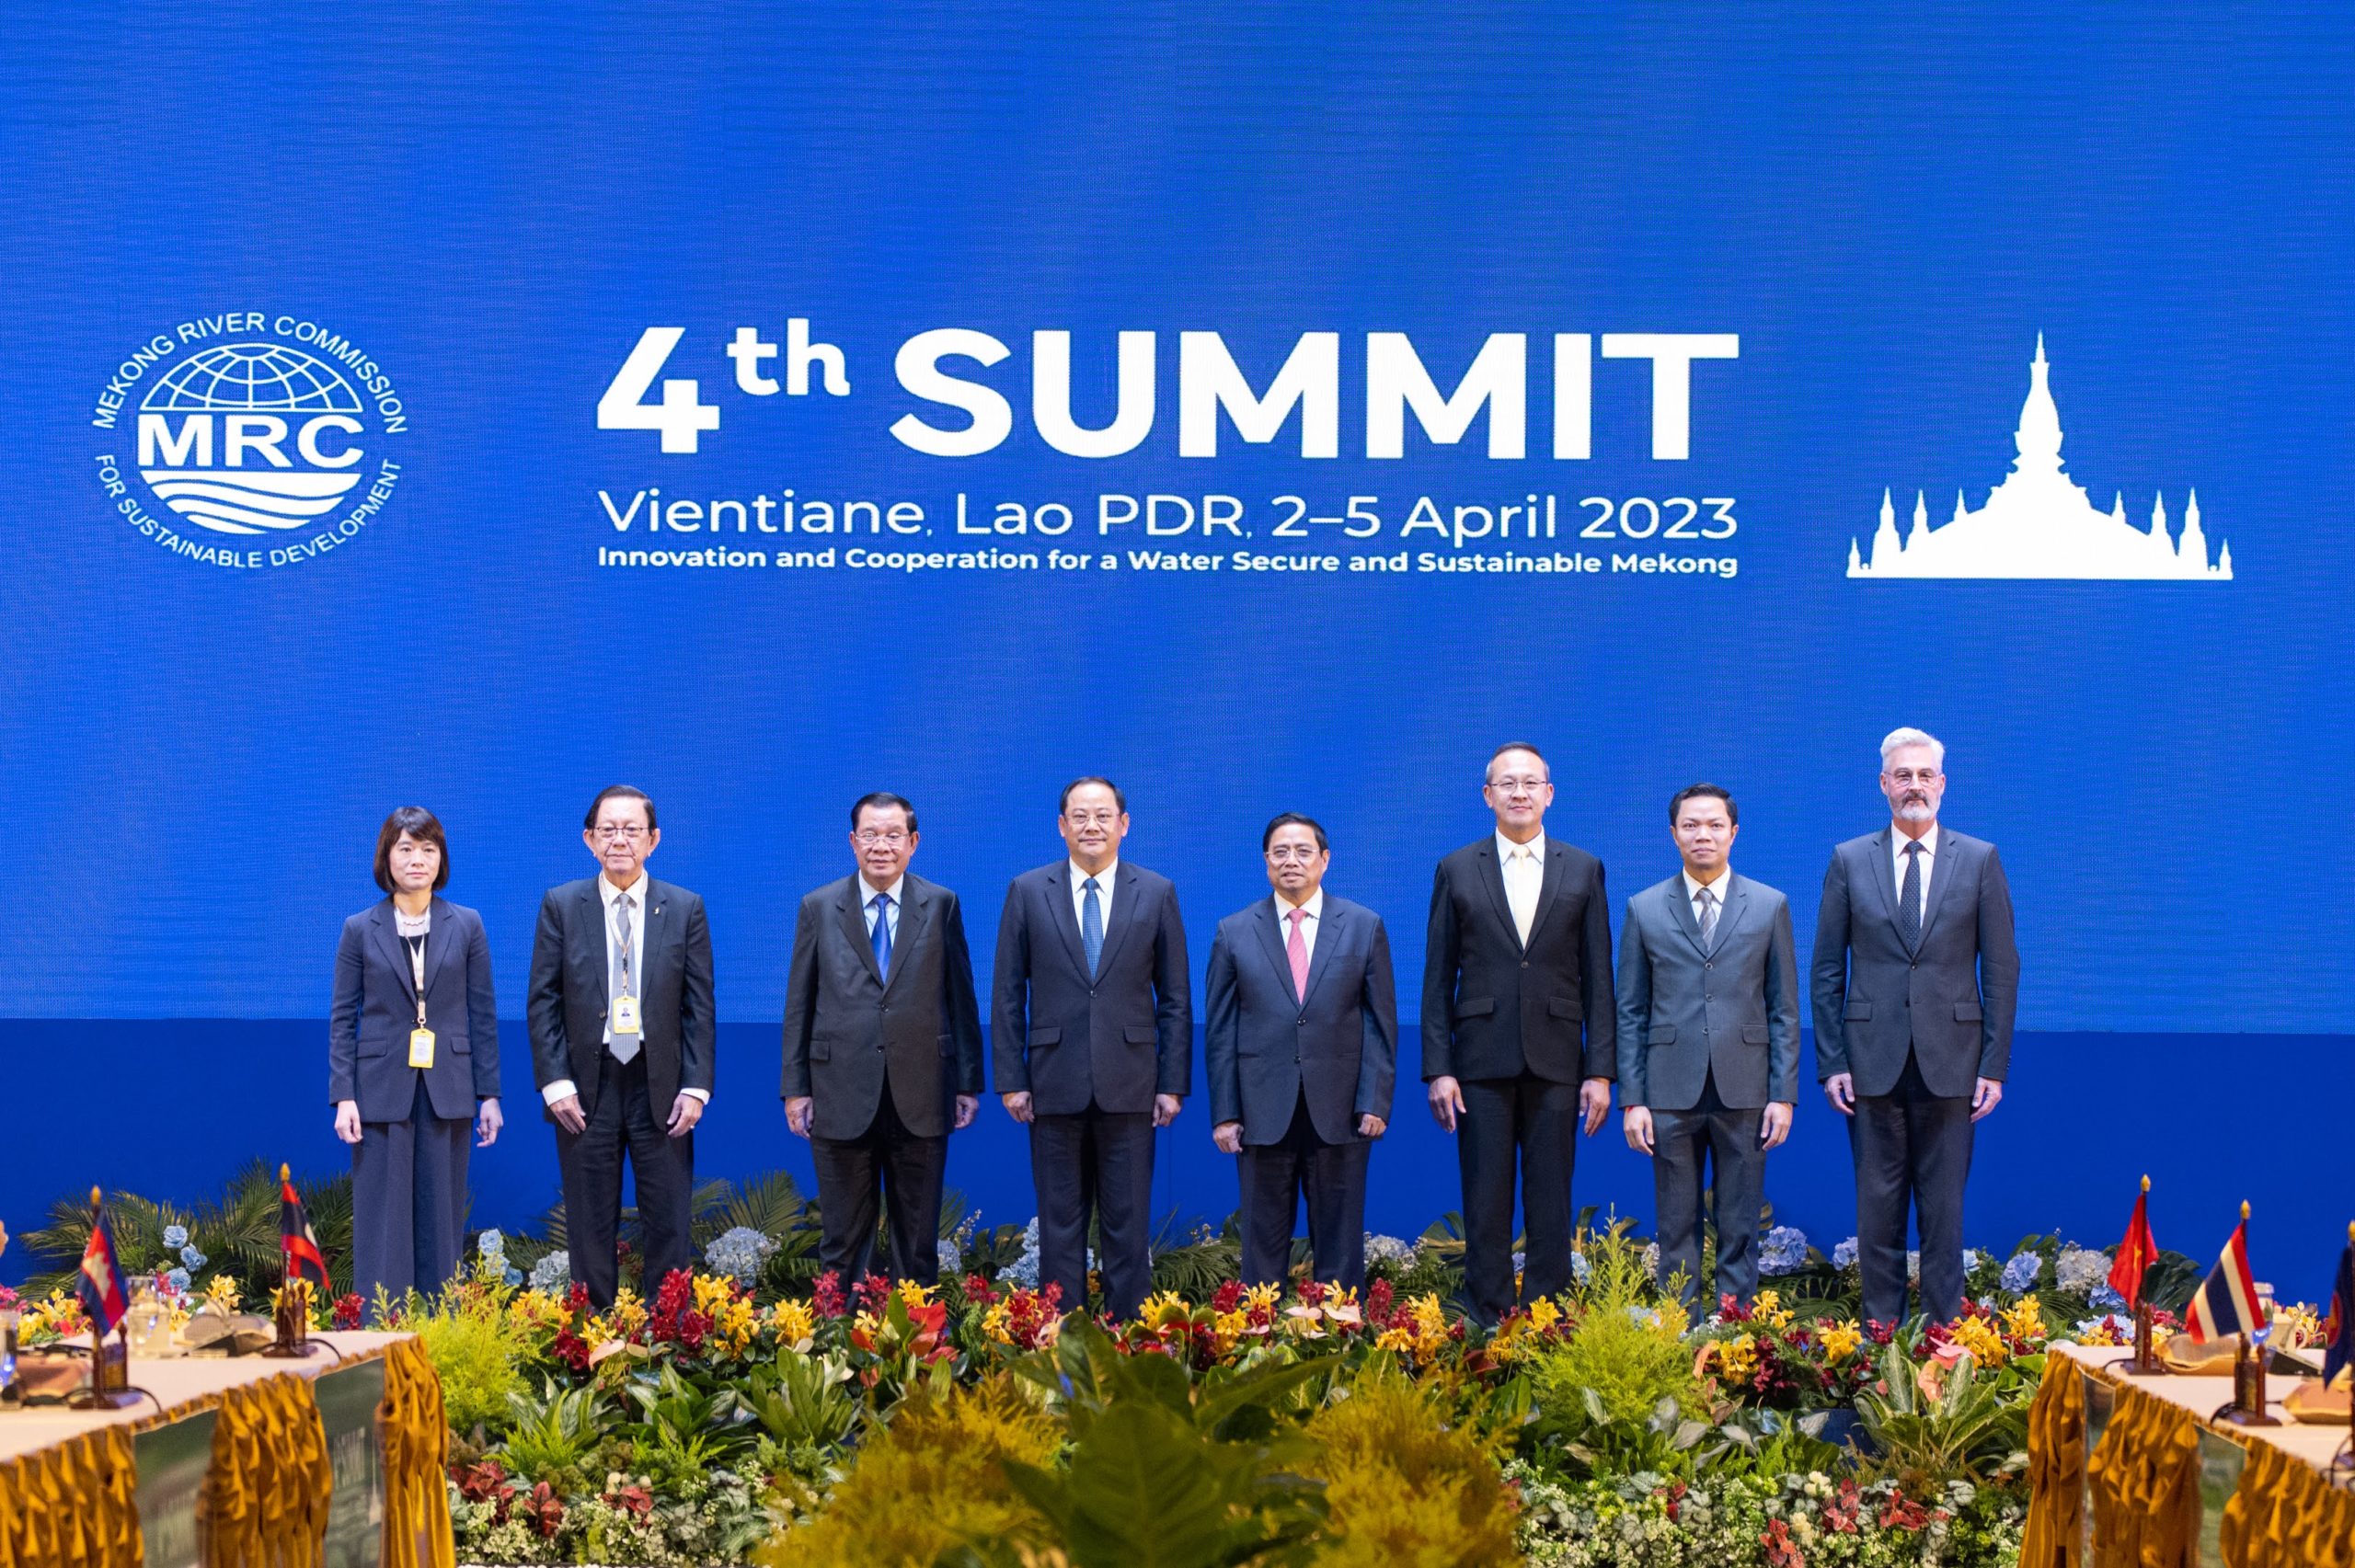 group of people in suits posing in front of Mekong River Commission summit sign